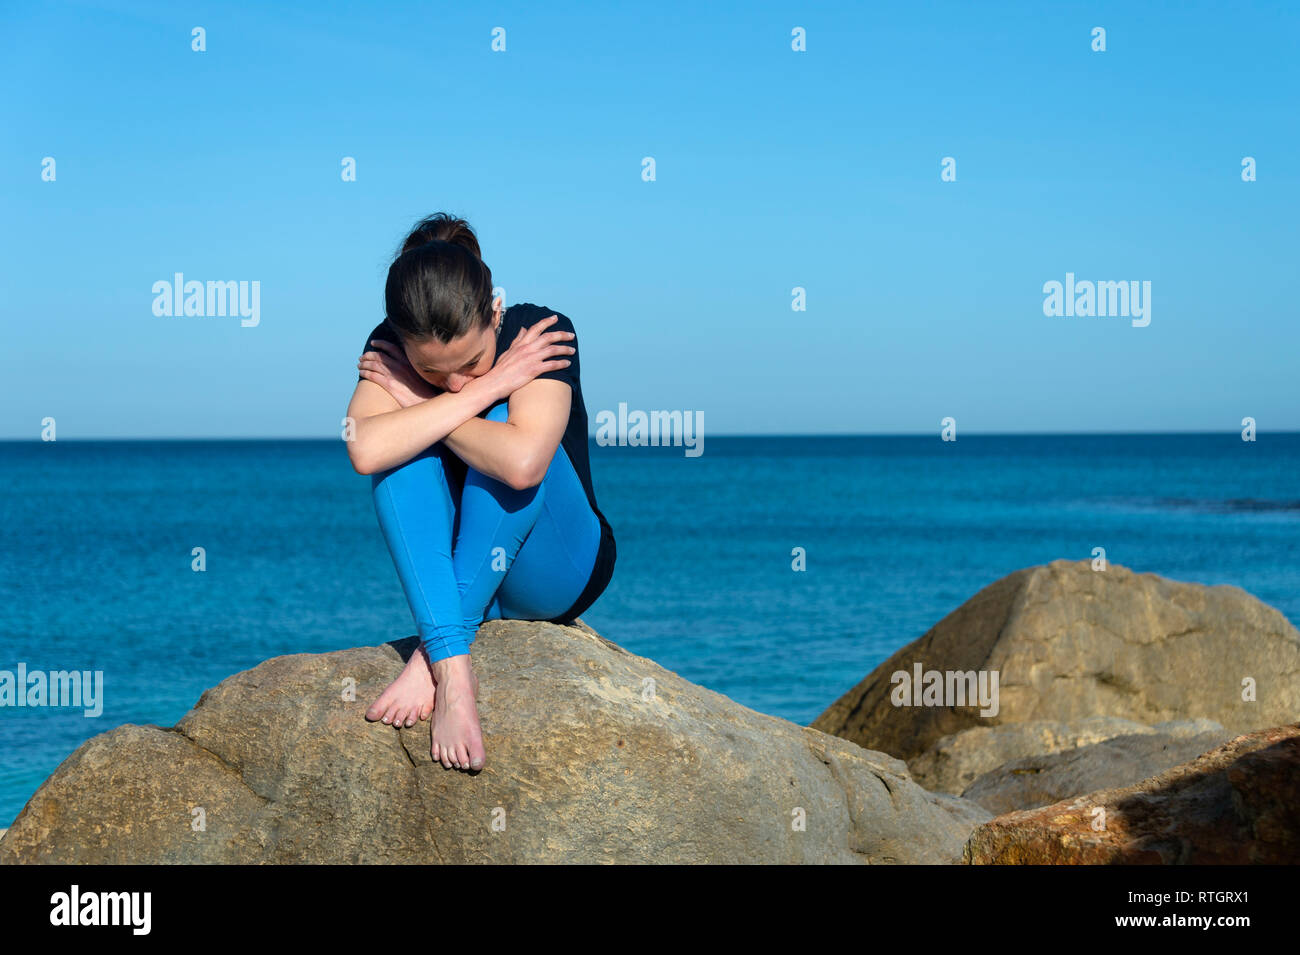 Depressed woman sitting on rocks by the sea Stock Photo